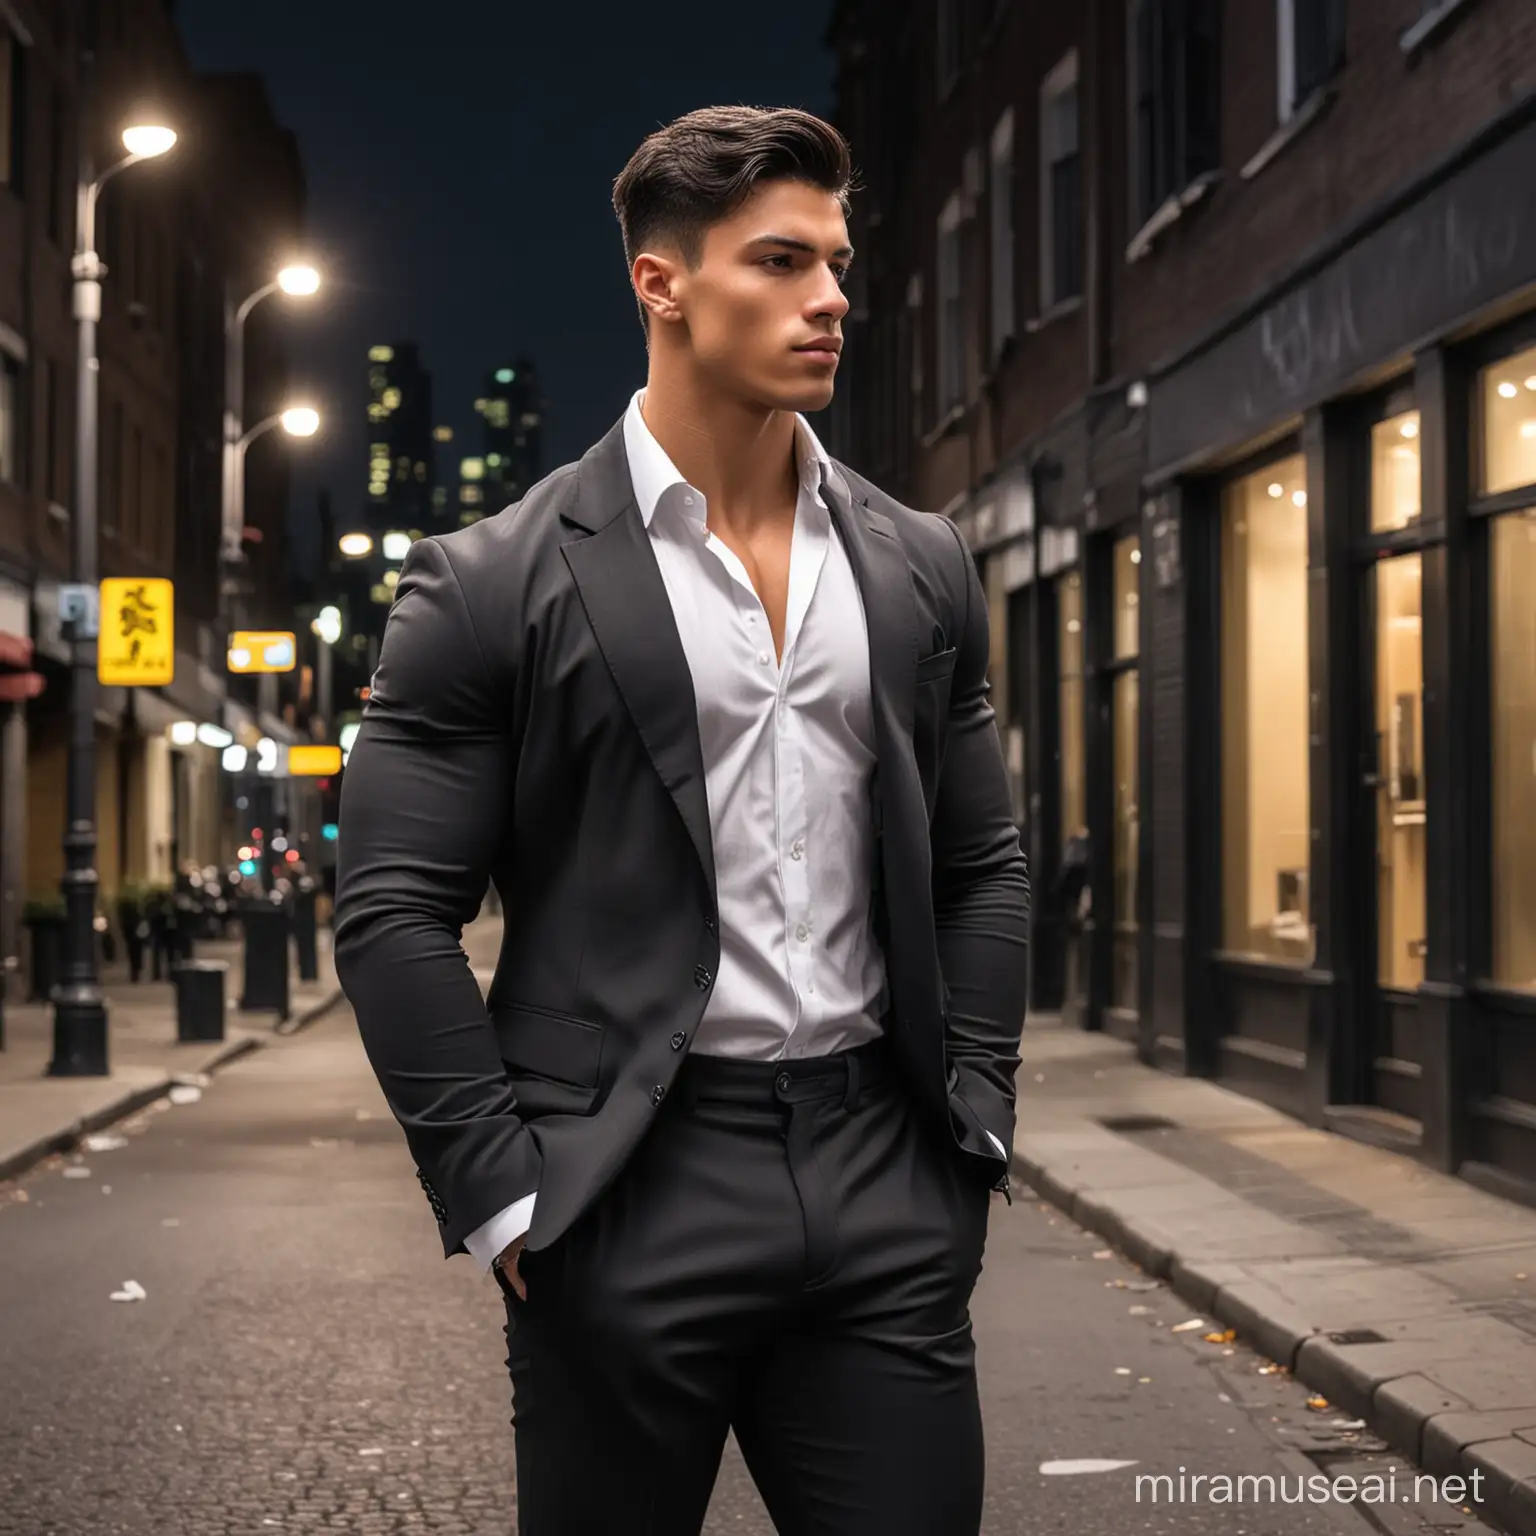 A handsome big extremely muscular male bodybuilder, 20 year old, short black hair, businessman, wearing a black suit, long black trousers, white shirt, standing outside on the street at night, realistic